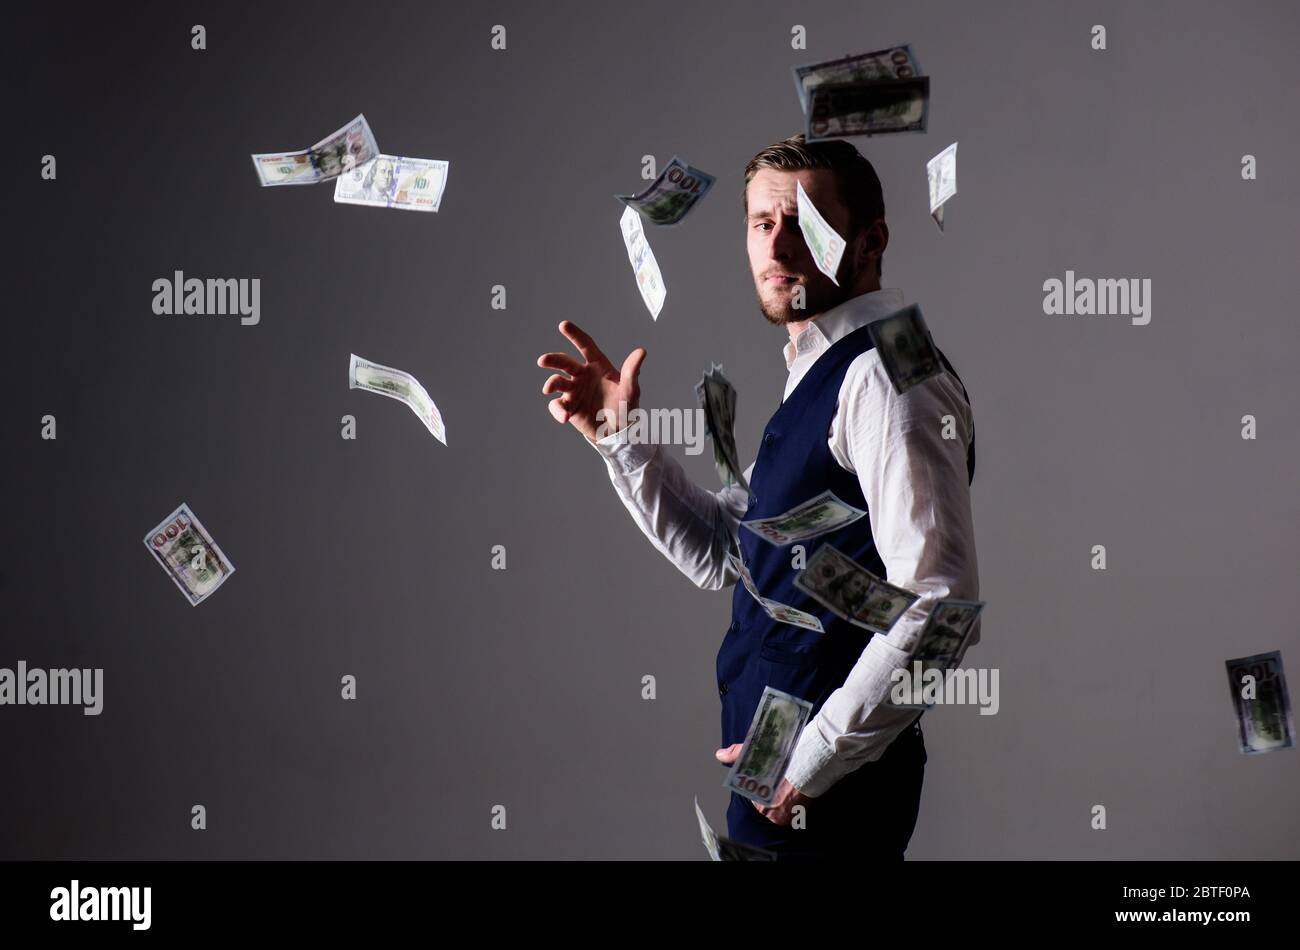 Throwing Money High Resolution Stock Photography and Images - Alamy